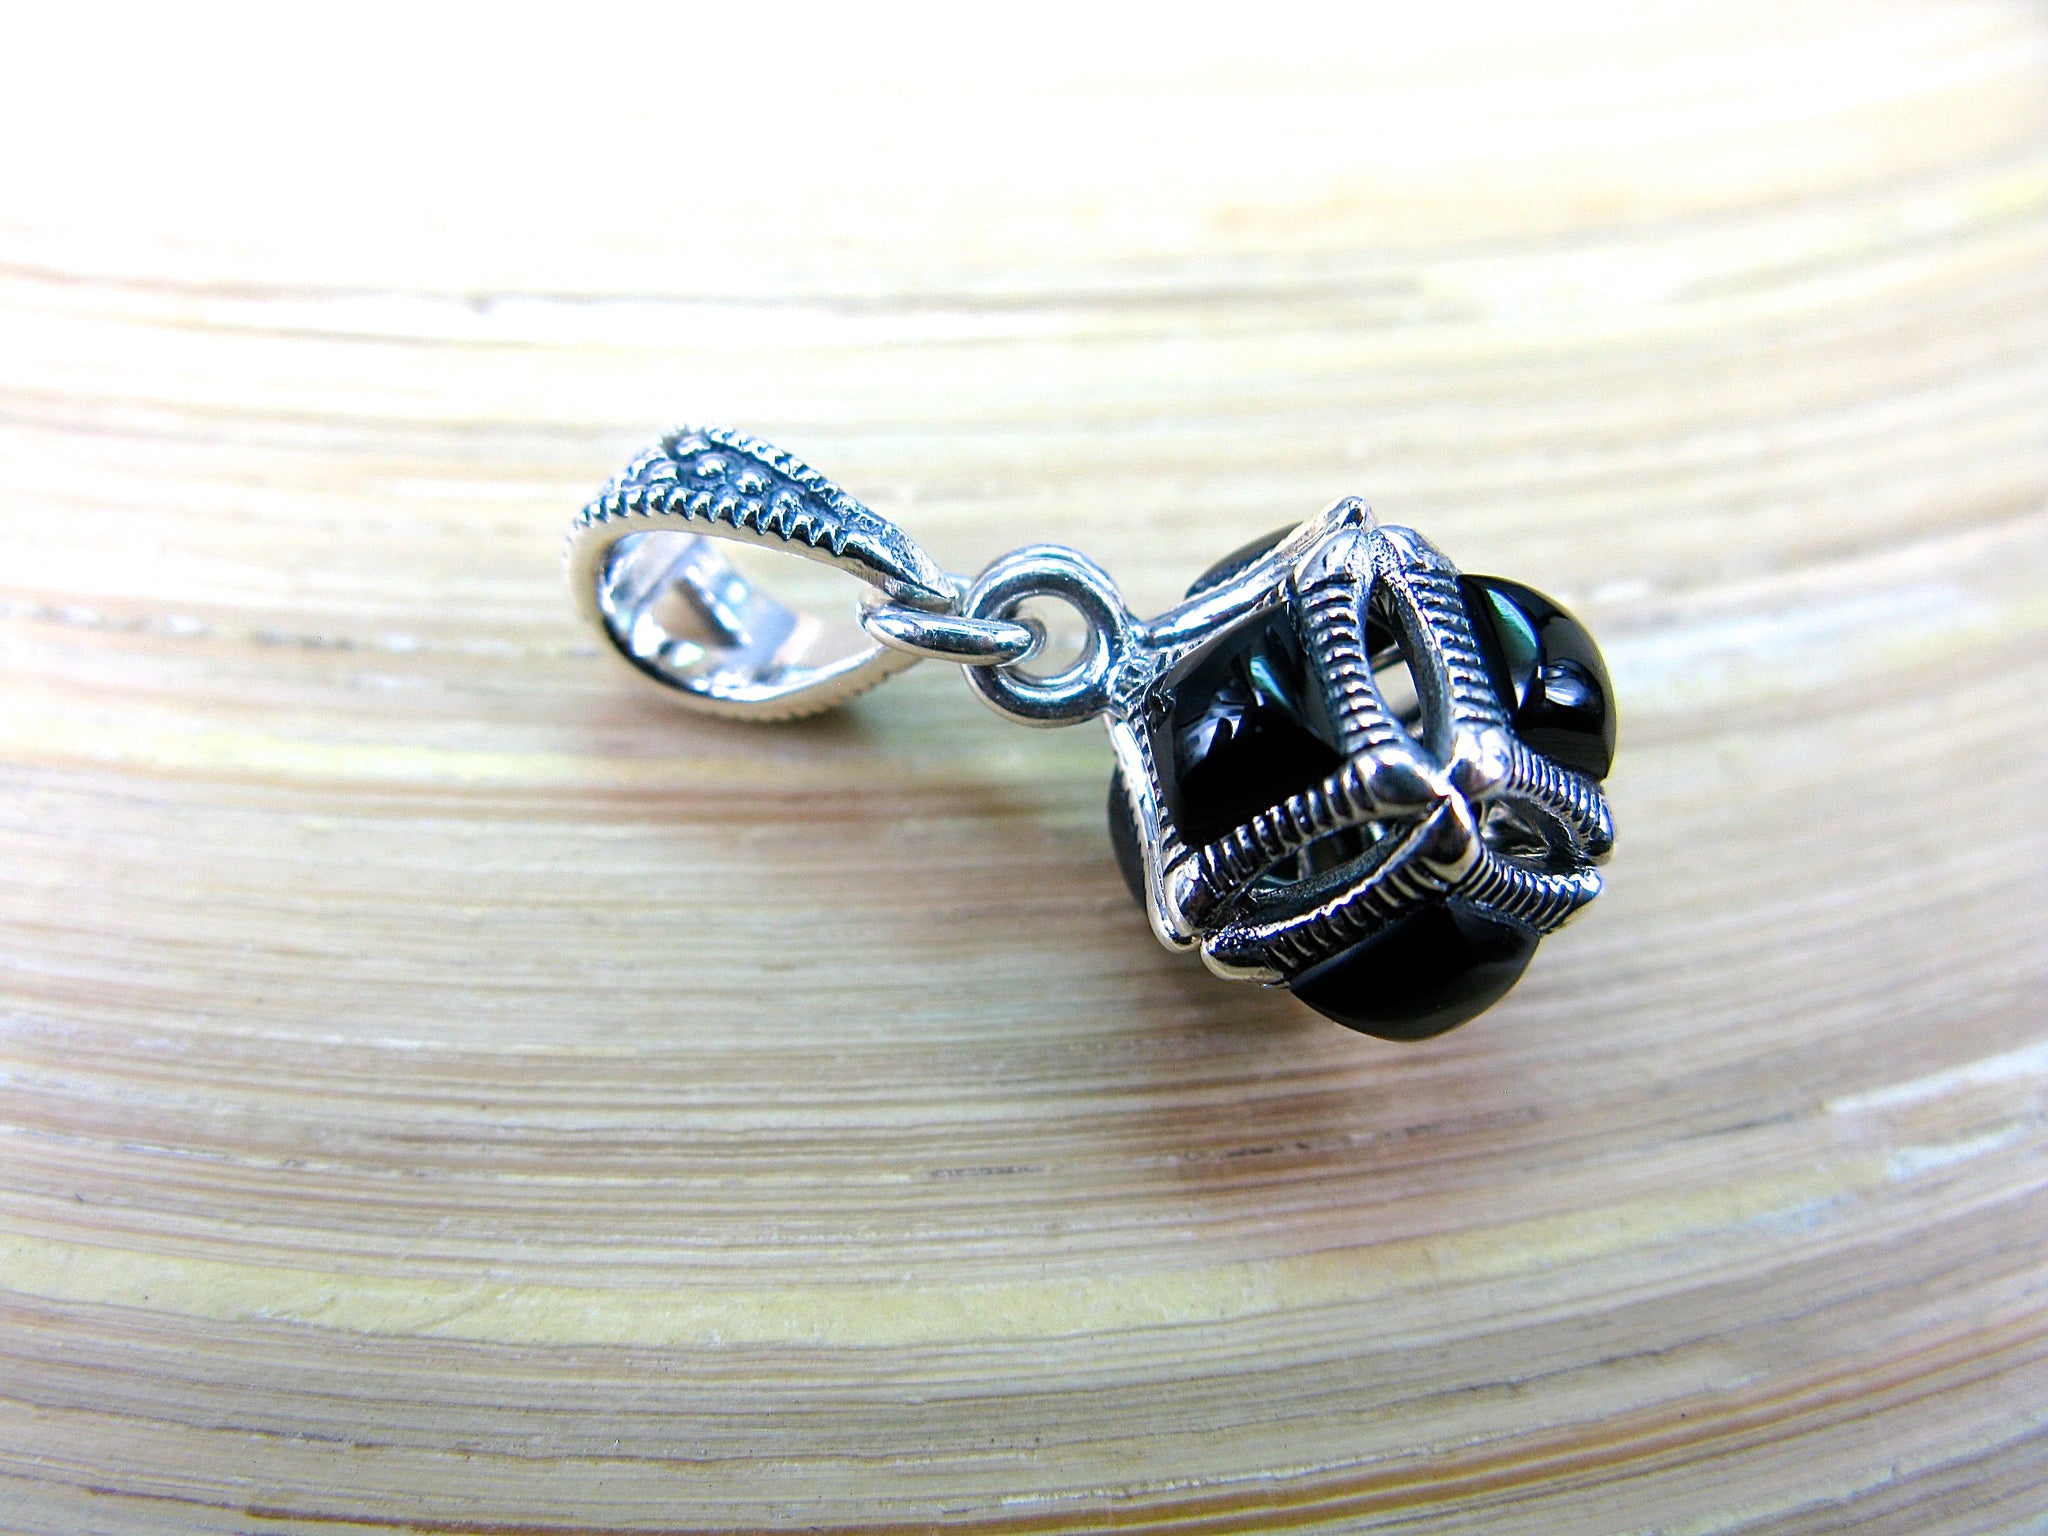 Cube Box Marcasite Onyx Pendant in 925 Sterling Silver